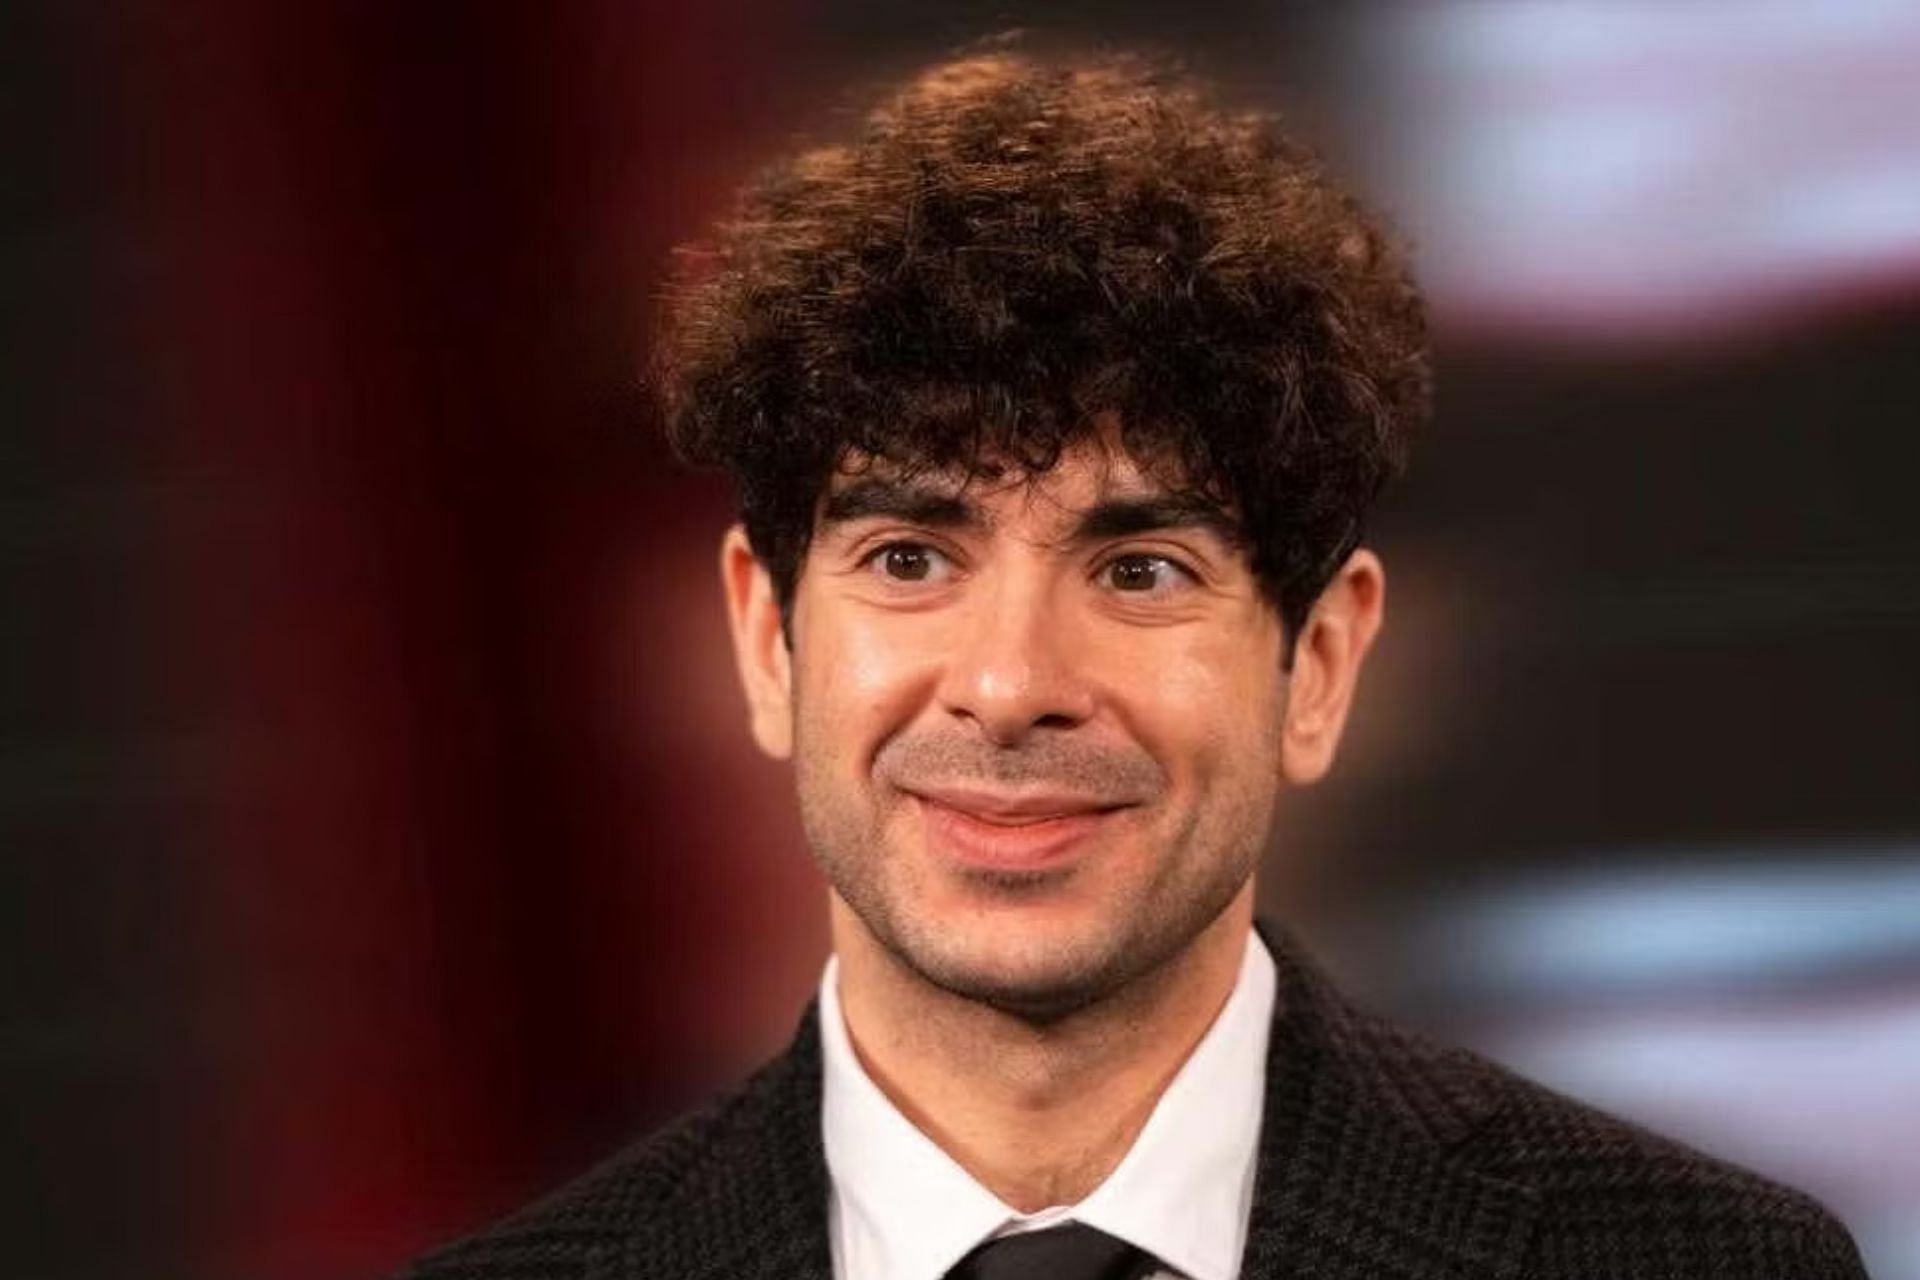 Tony Khan is in the news for his interactons  -  or lack thereof with former wrestlers